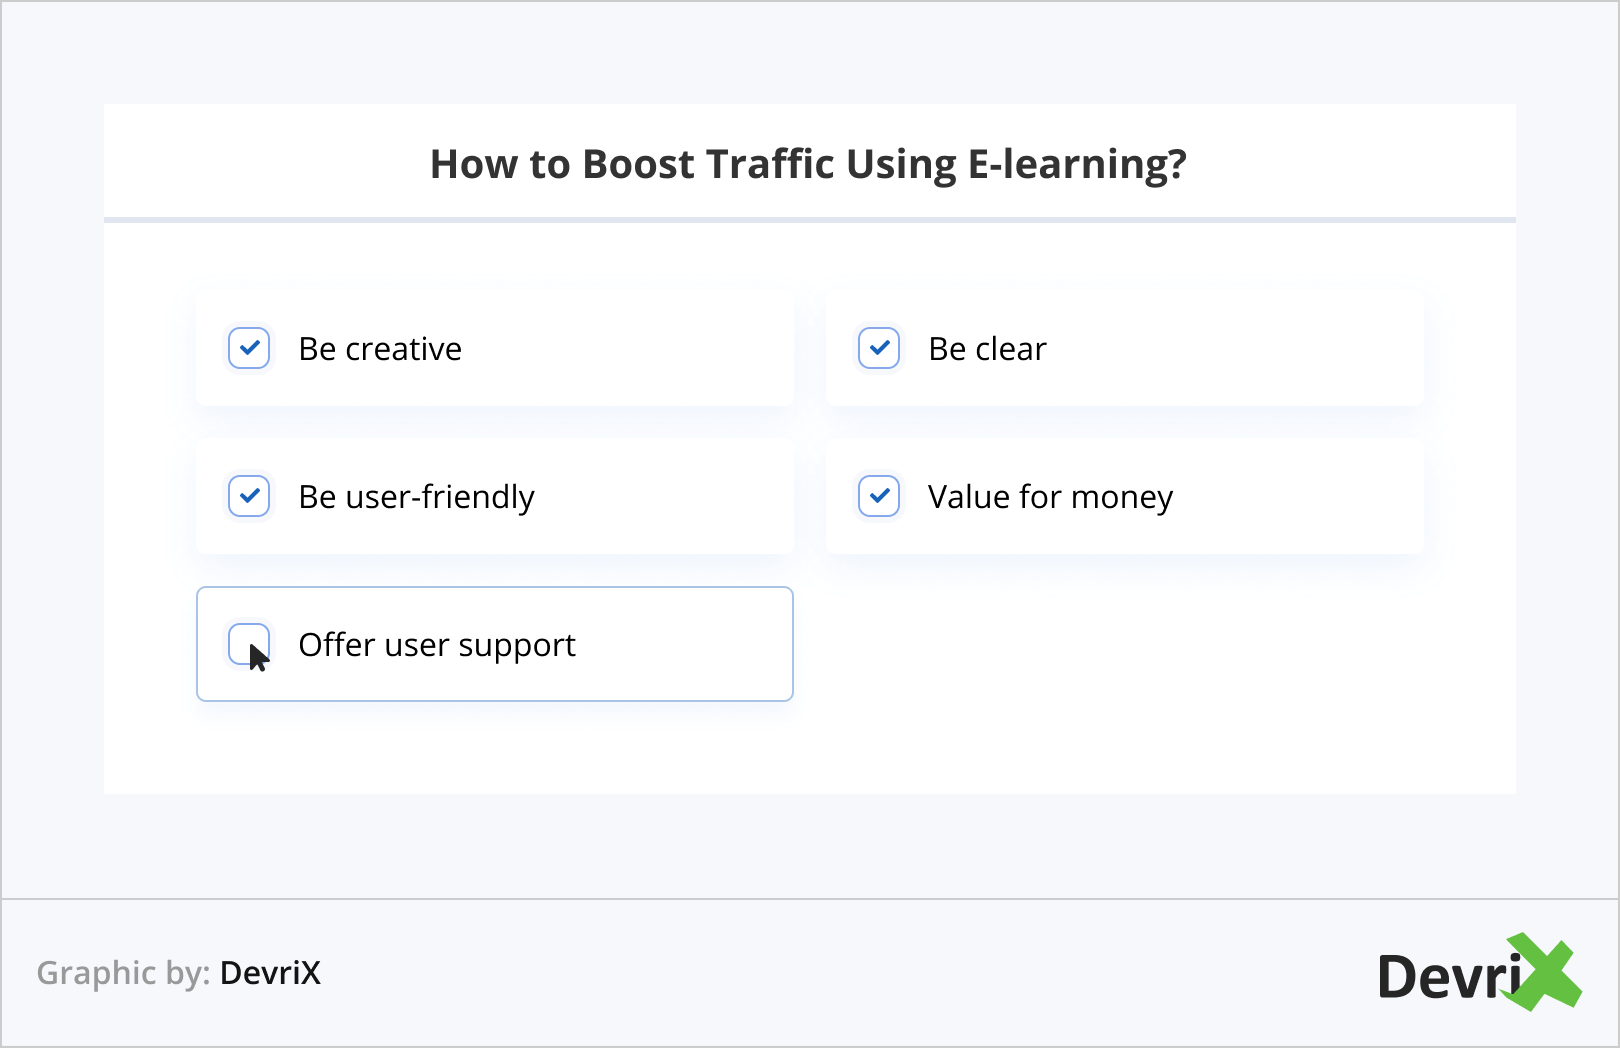 How to Boost Traffic Using E-learning